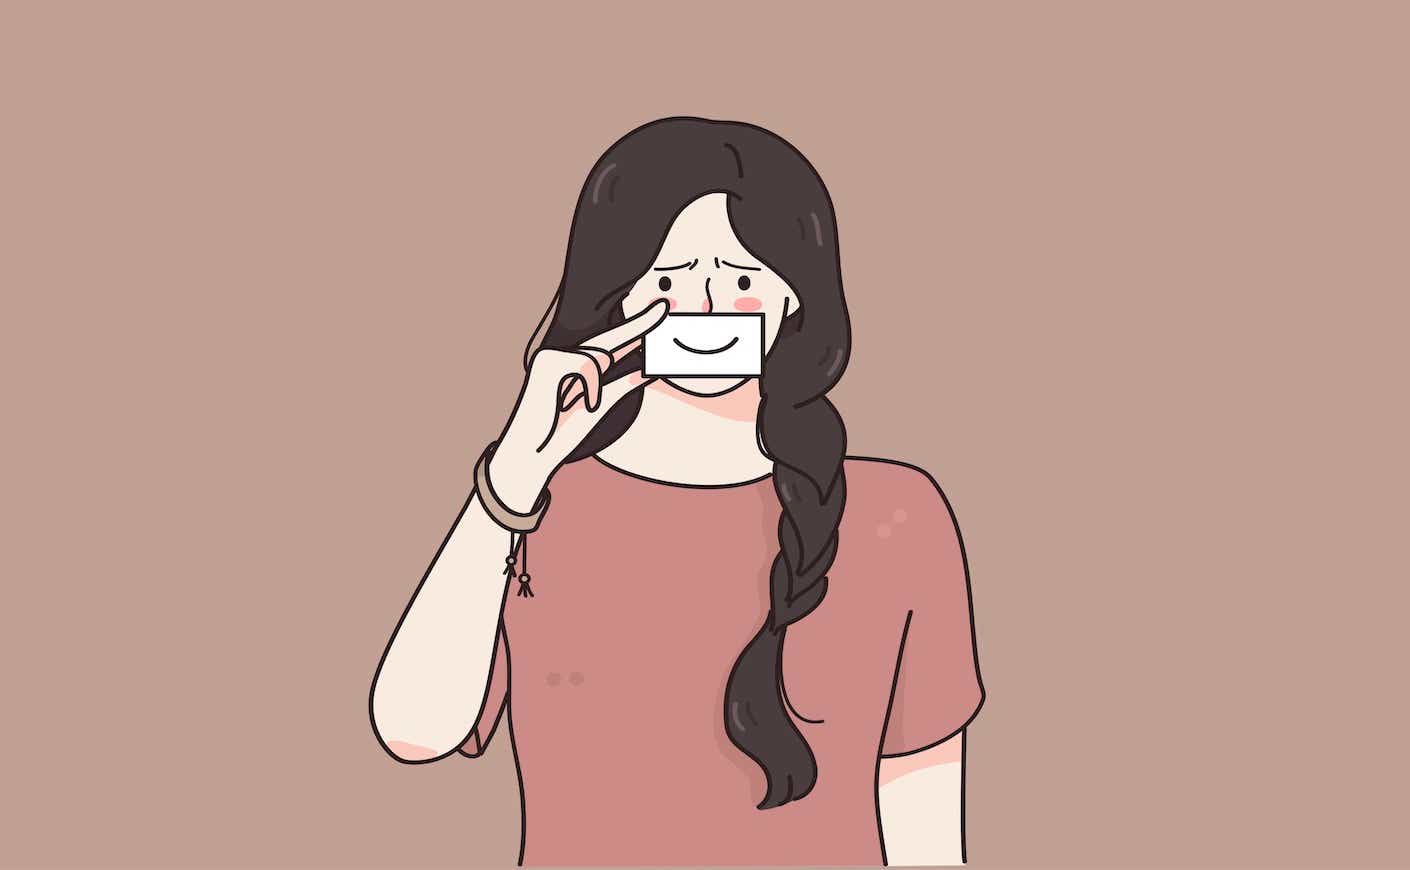 illustration of a woman holding up a drawn smile in front of her mouth